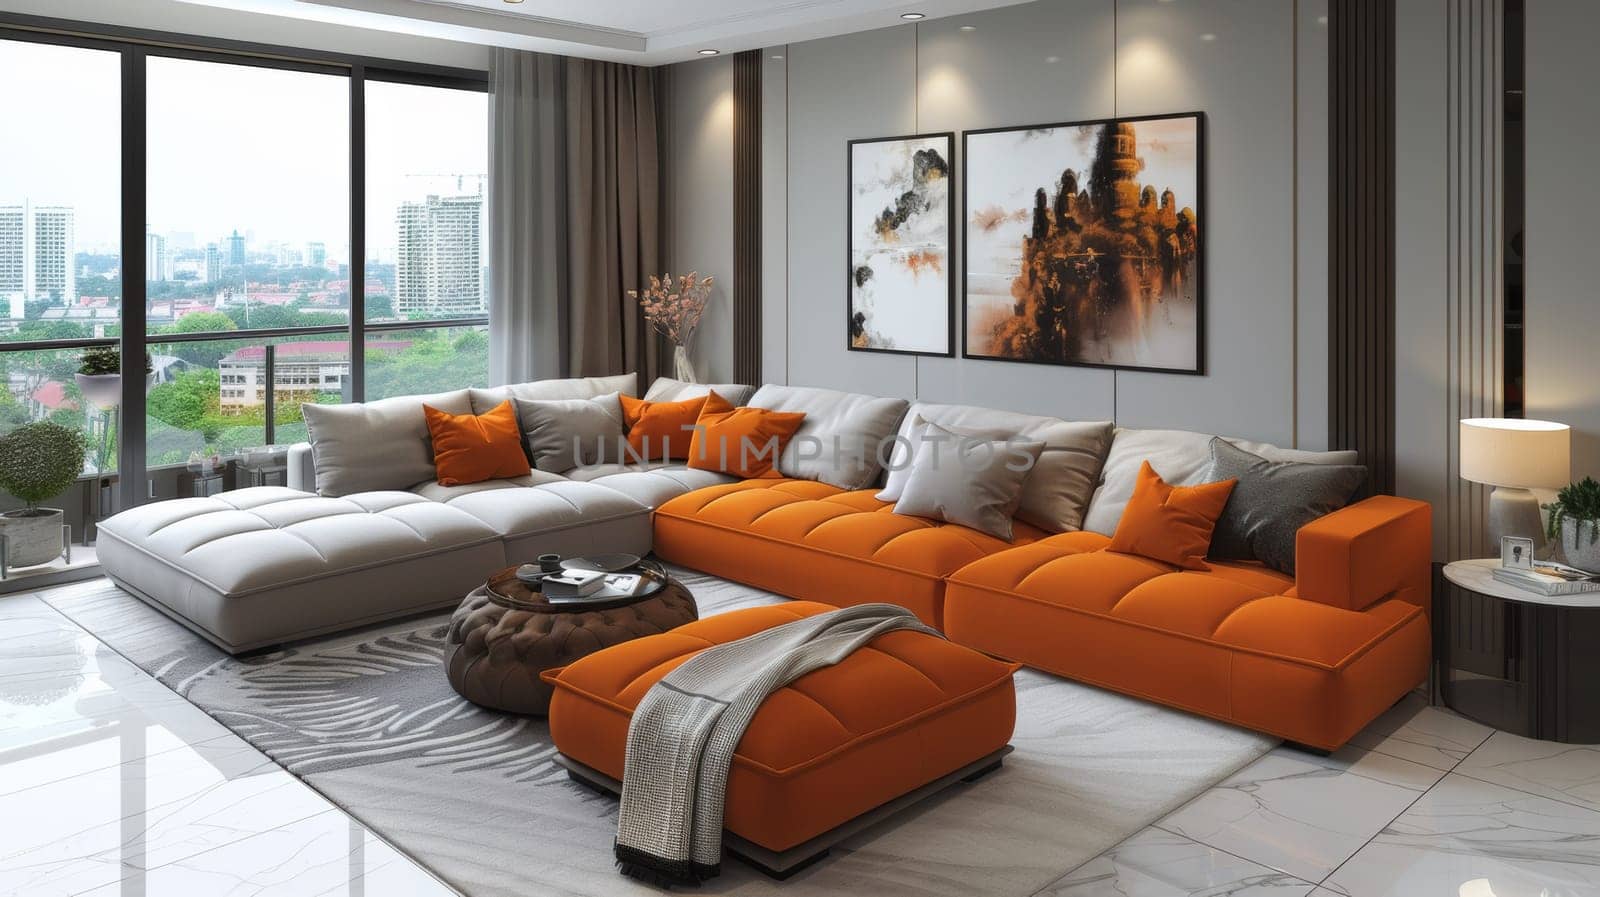 A living room with a large sectional couch and ottoman